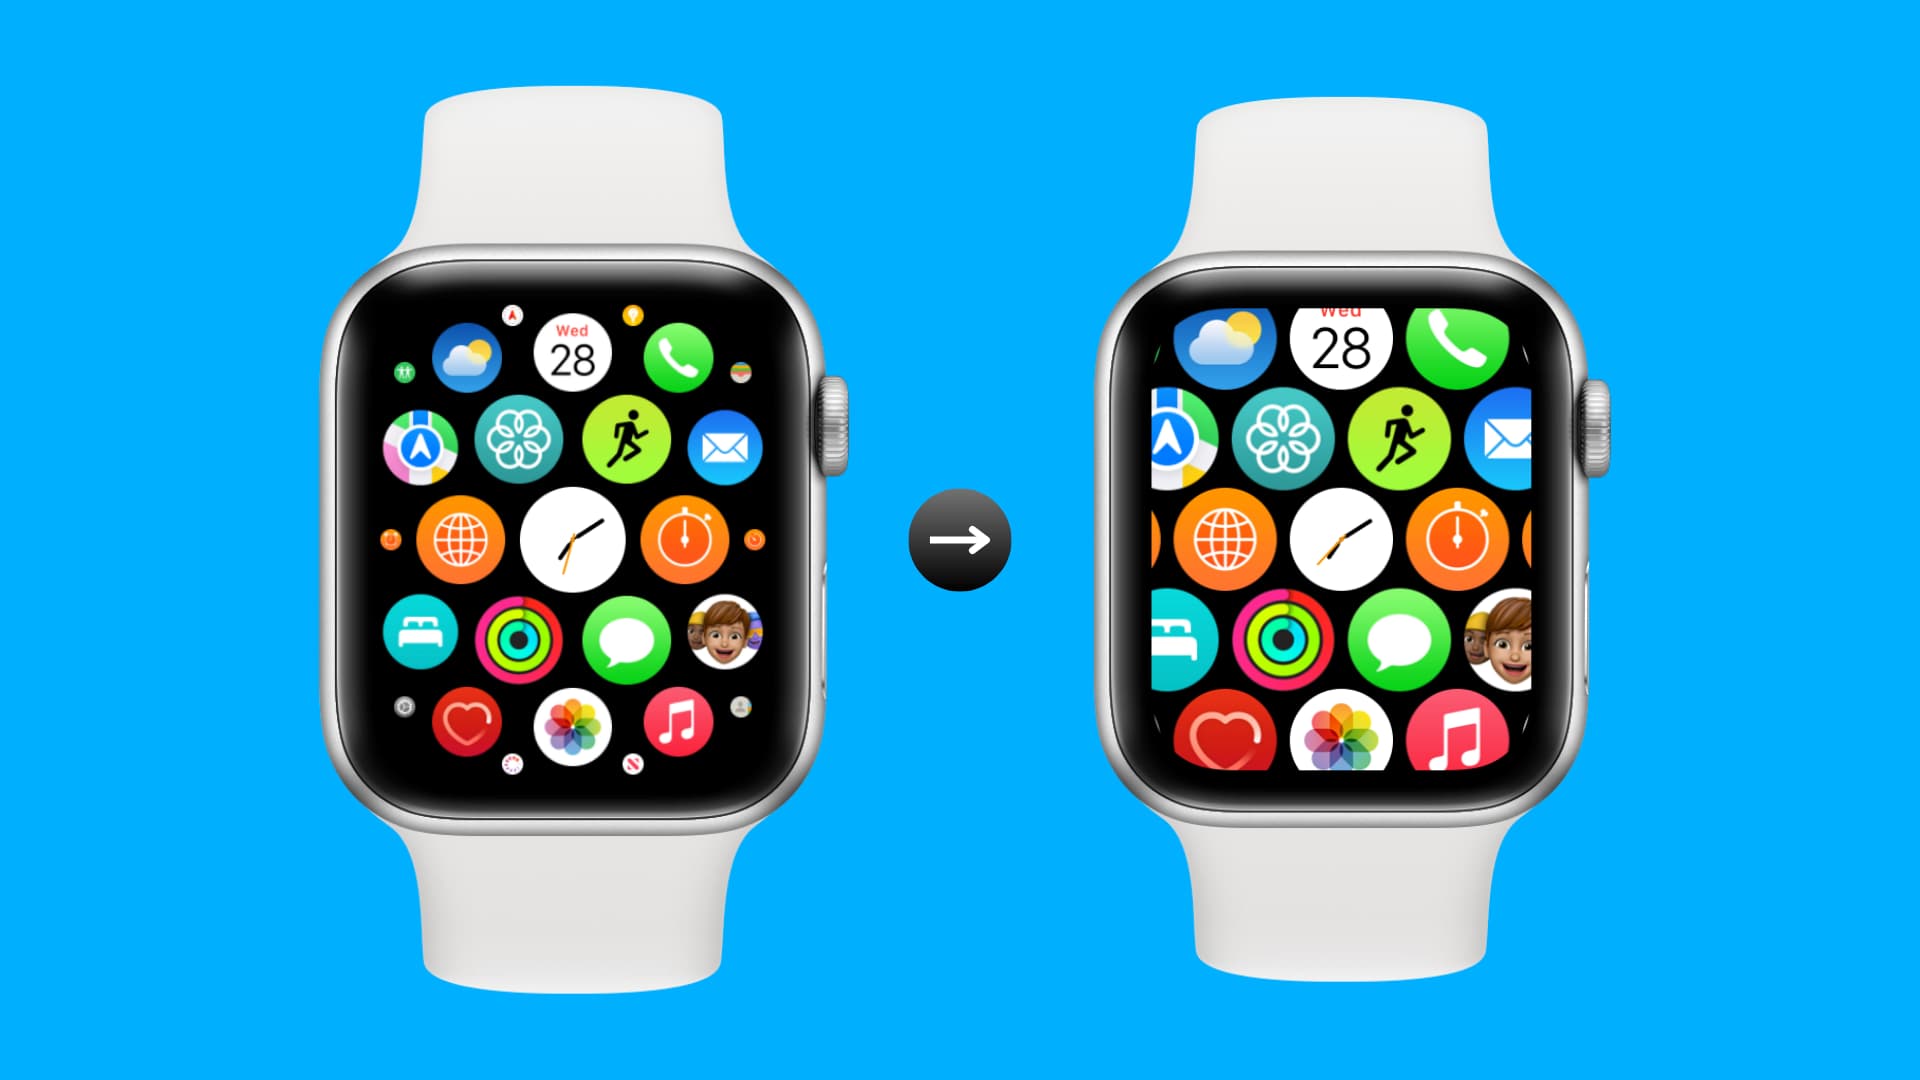 Larger app icons on Apple Watch